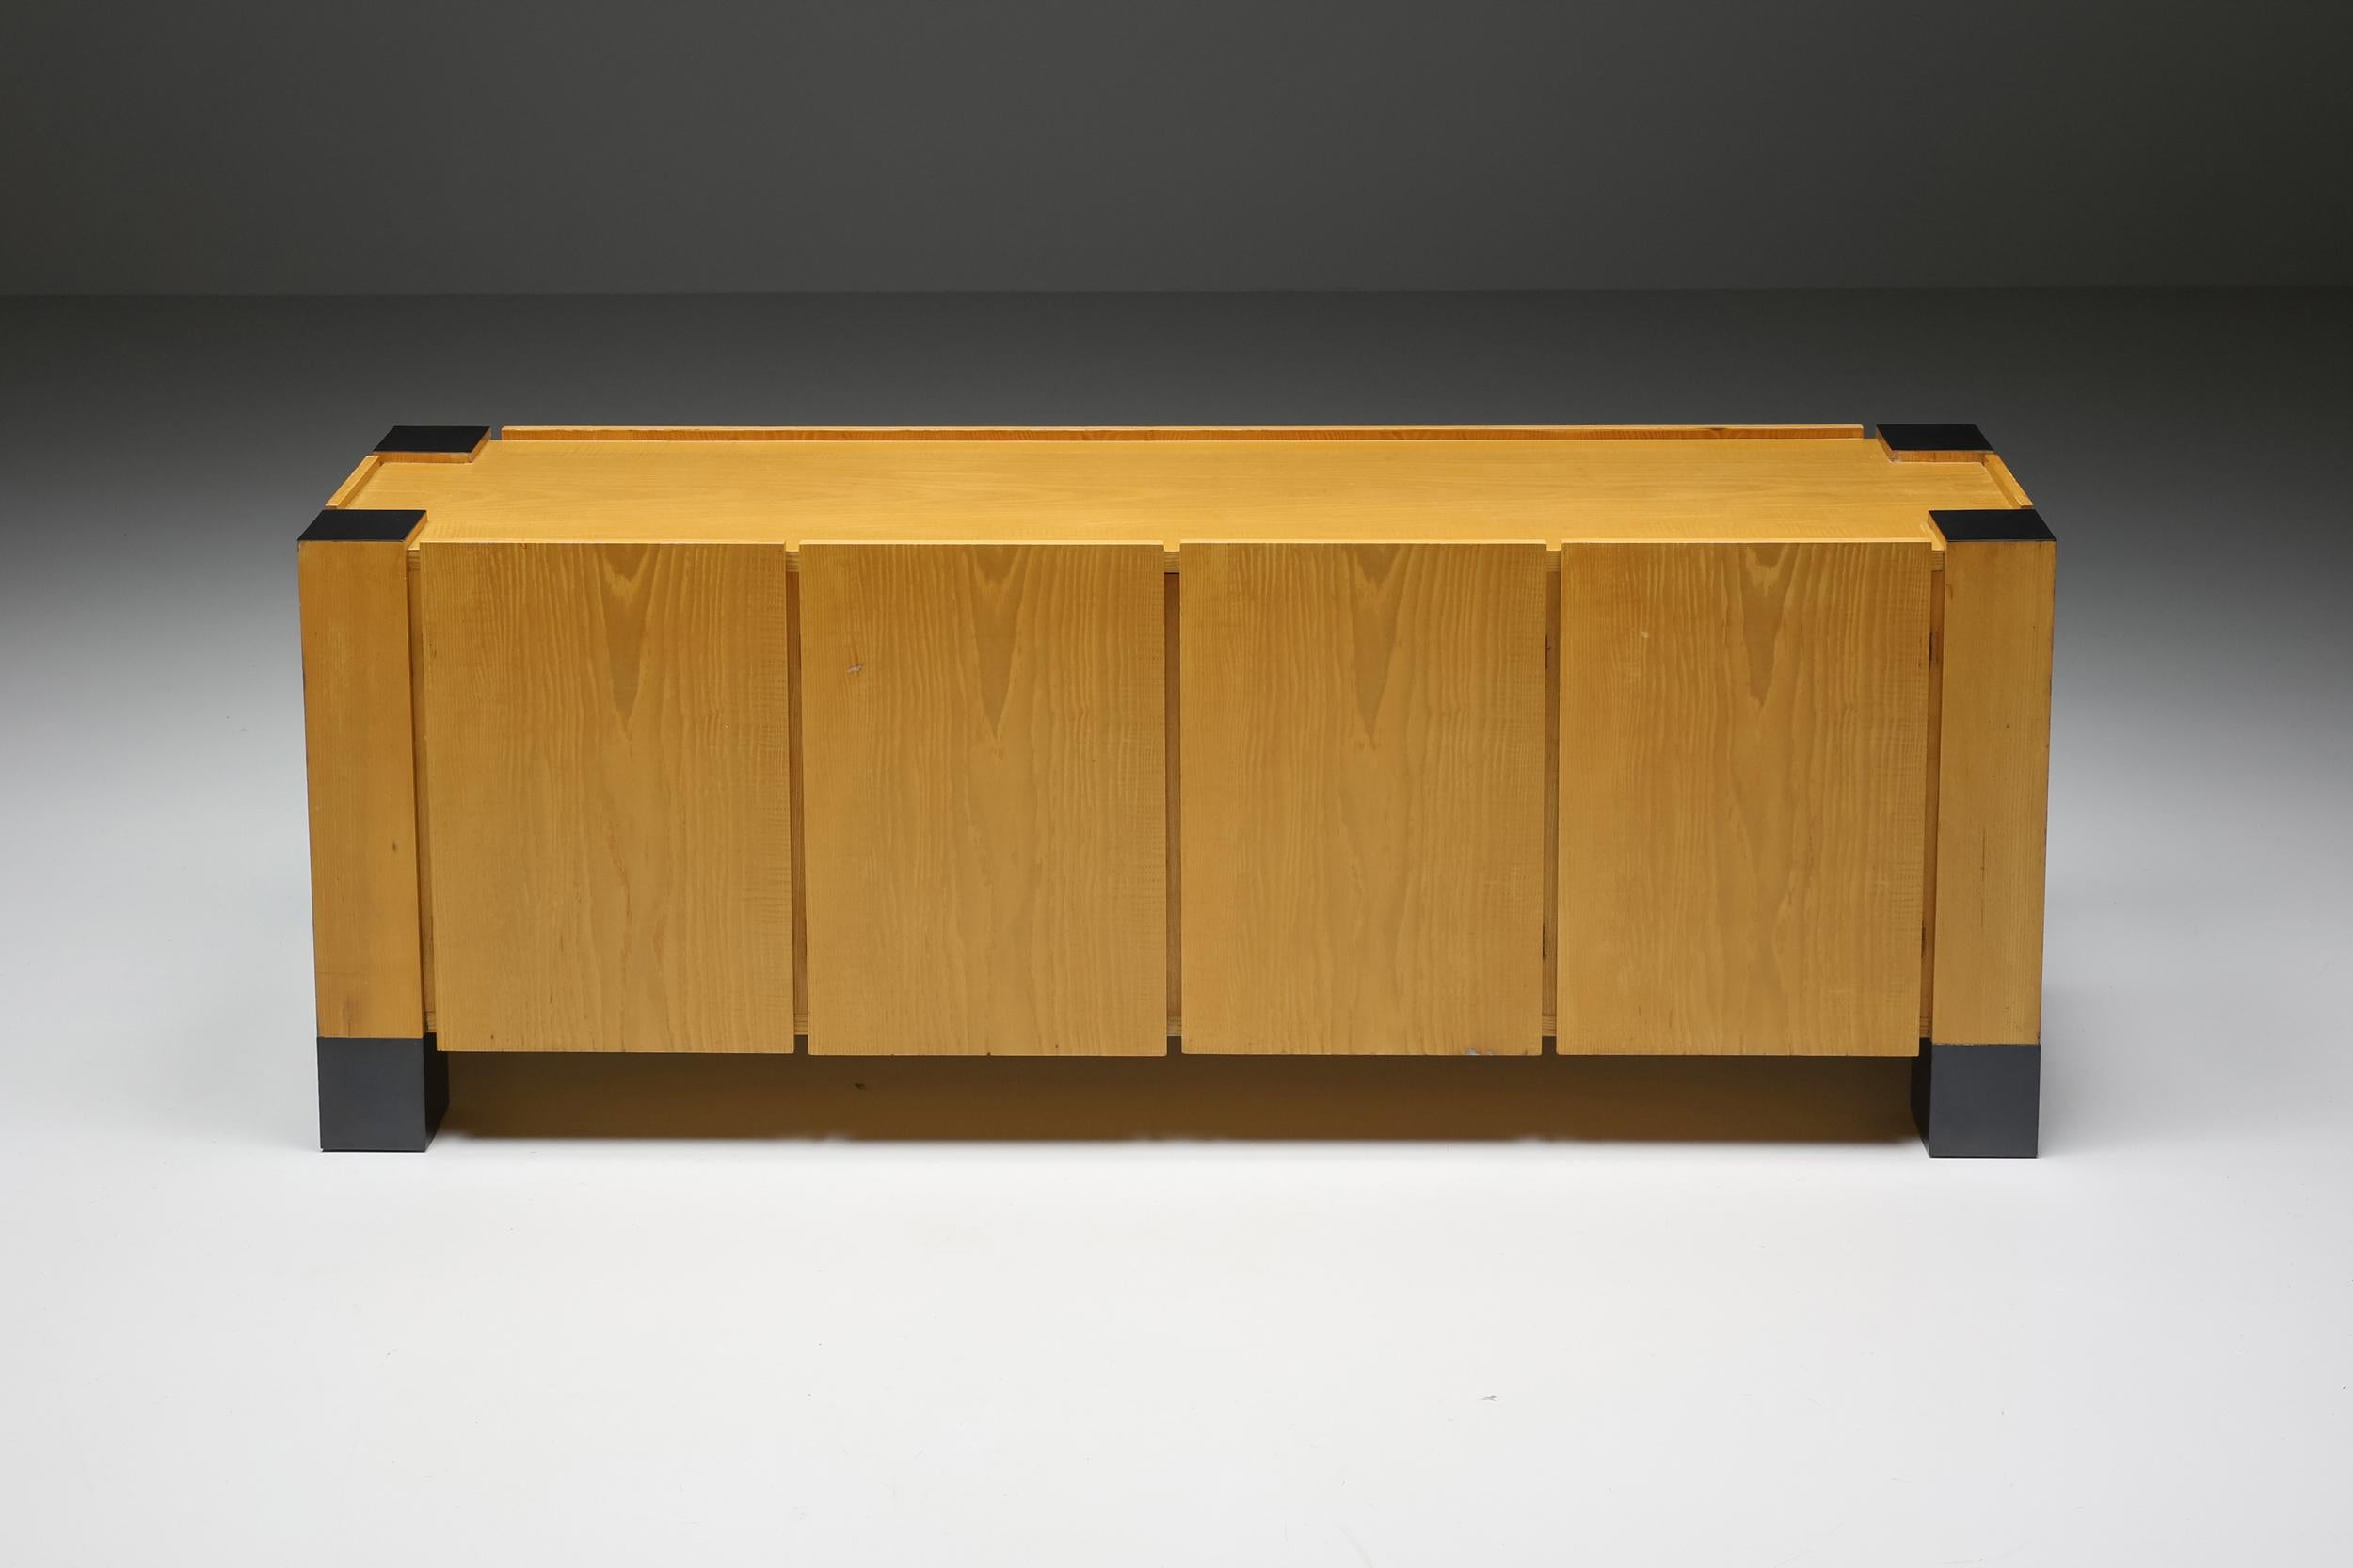 Post-modern; Italian design; Roberto Pamio and Renato Toso; sideboard; Credenza; Room divider, Italy, 1970's

Post-modern Italian credenza in wood with black-painted wooden pillars. A great and rare piece by the avant-garde designers Roberto Pamio